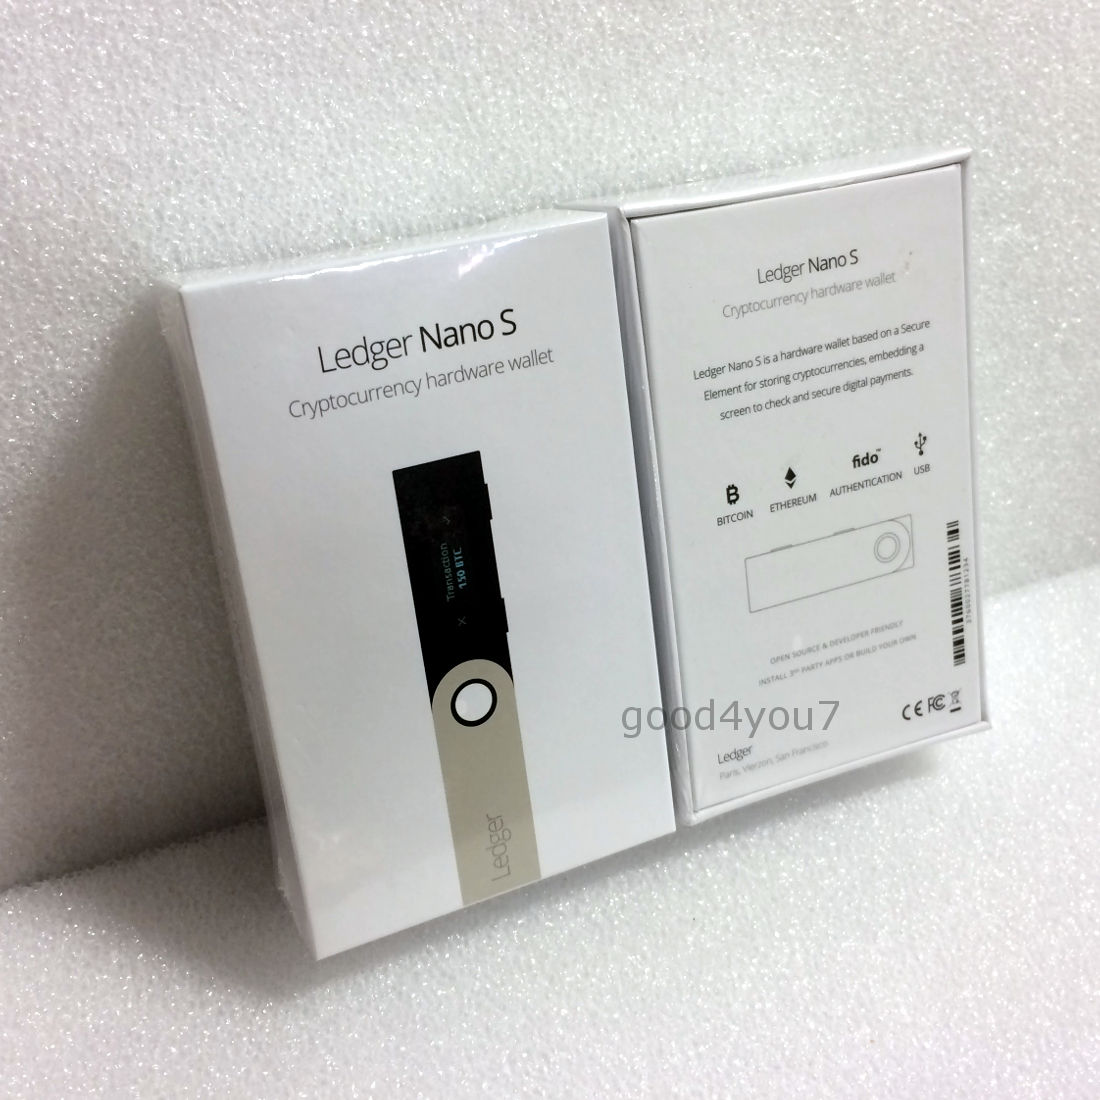 Ledger Nano S Cryptocurrency Bitcoin Ethereum Hardware Wallet Sealed in Box NEW